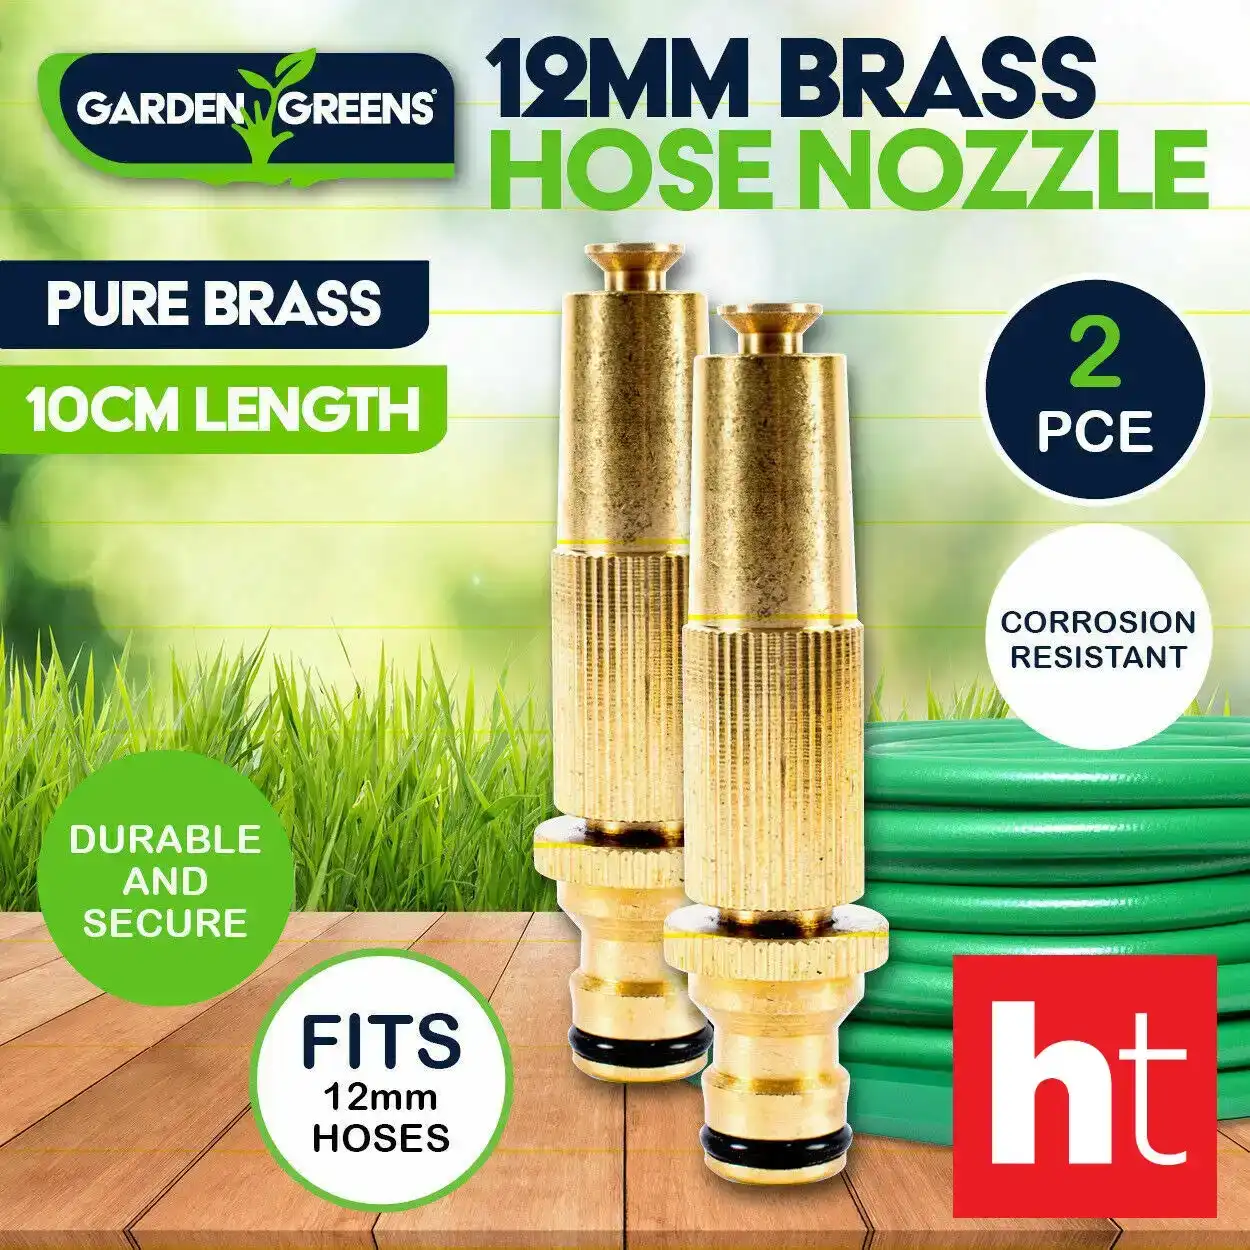 Garden Greens 2PCE Hose Nozzle Pure Brass with Adjustable Flow Rust Proof